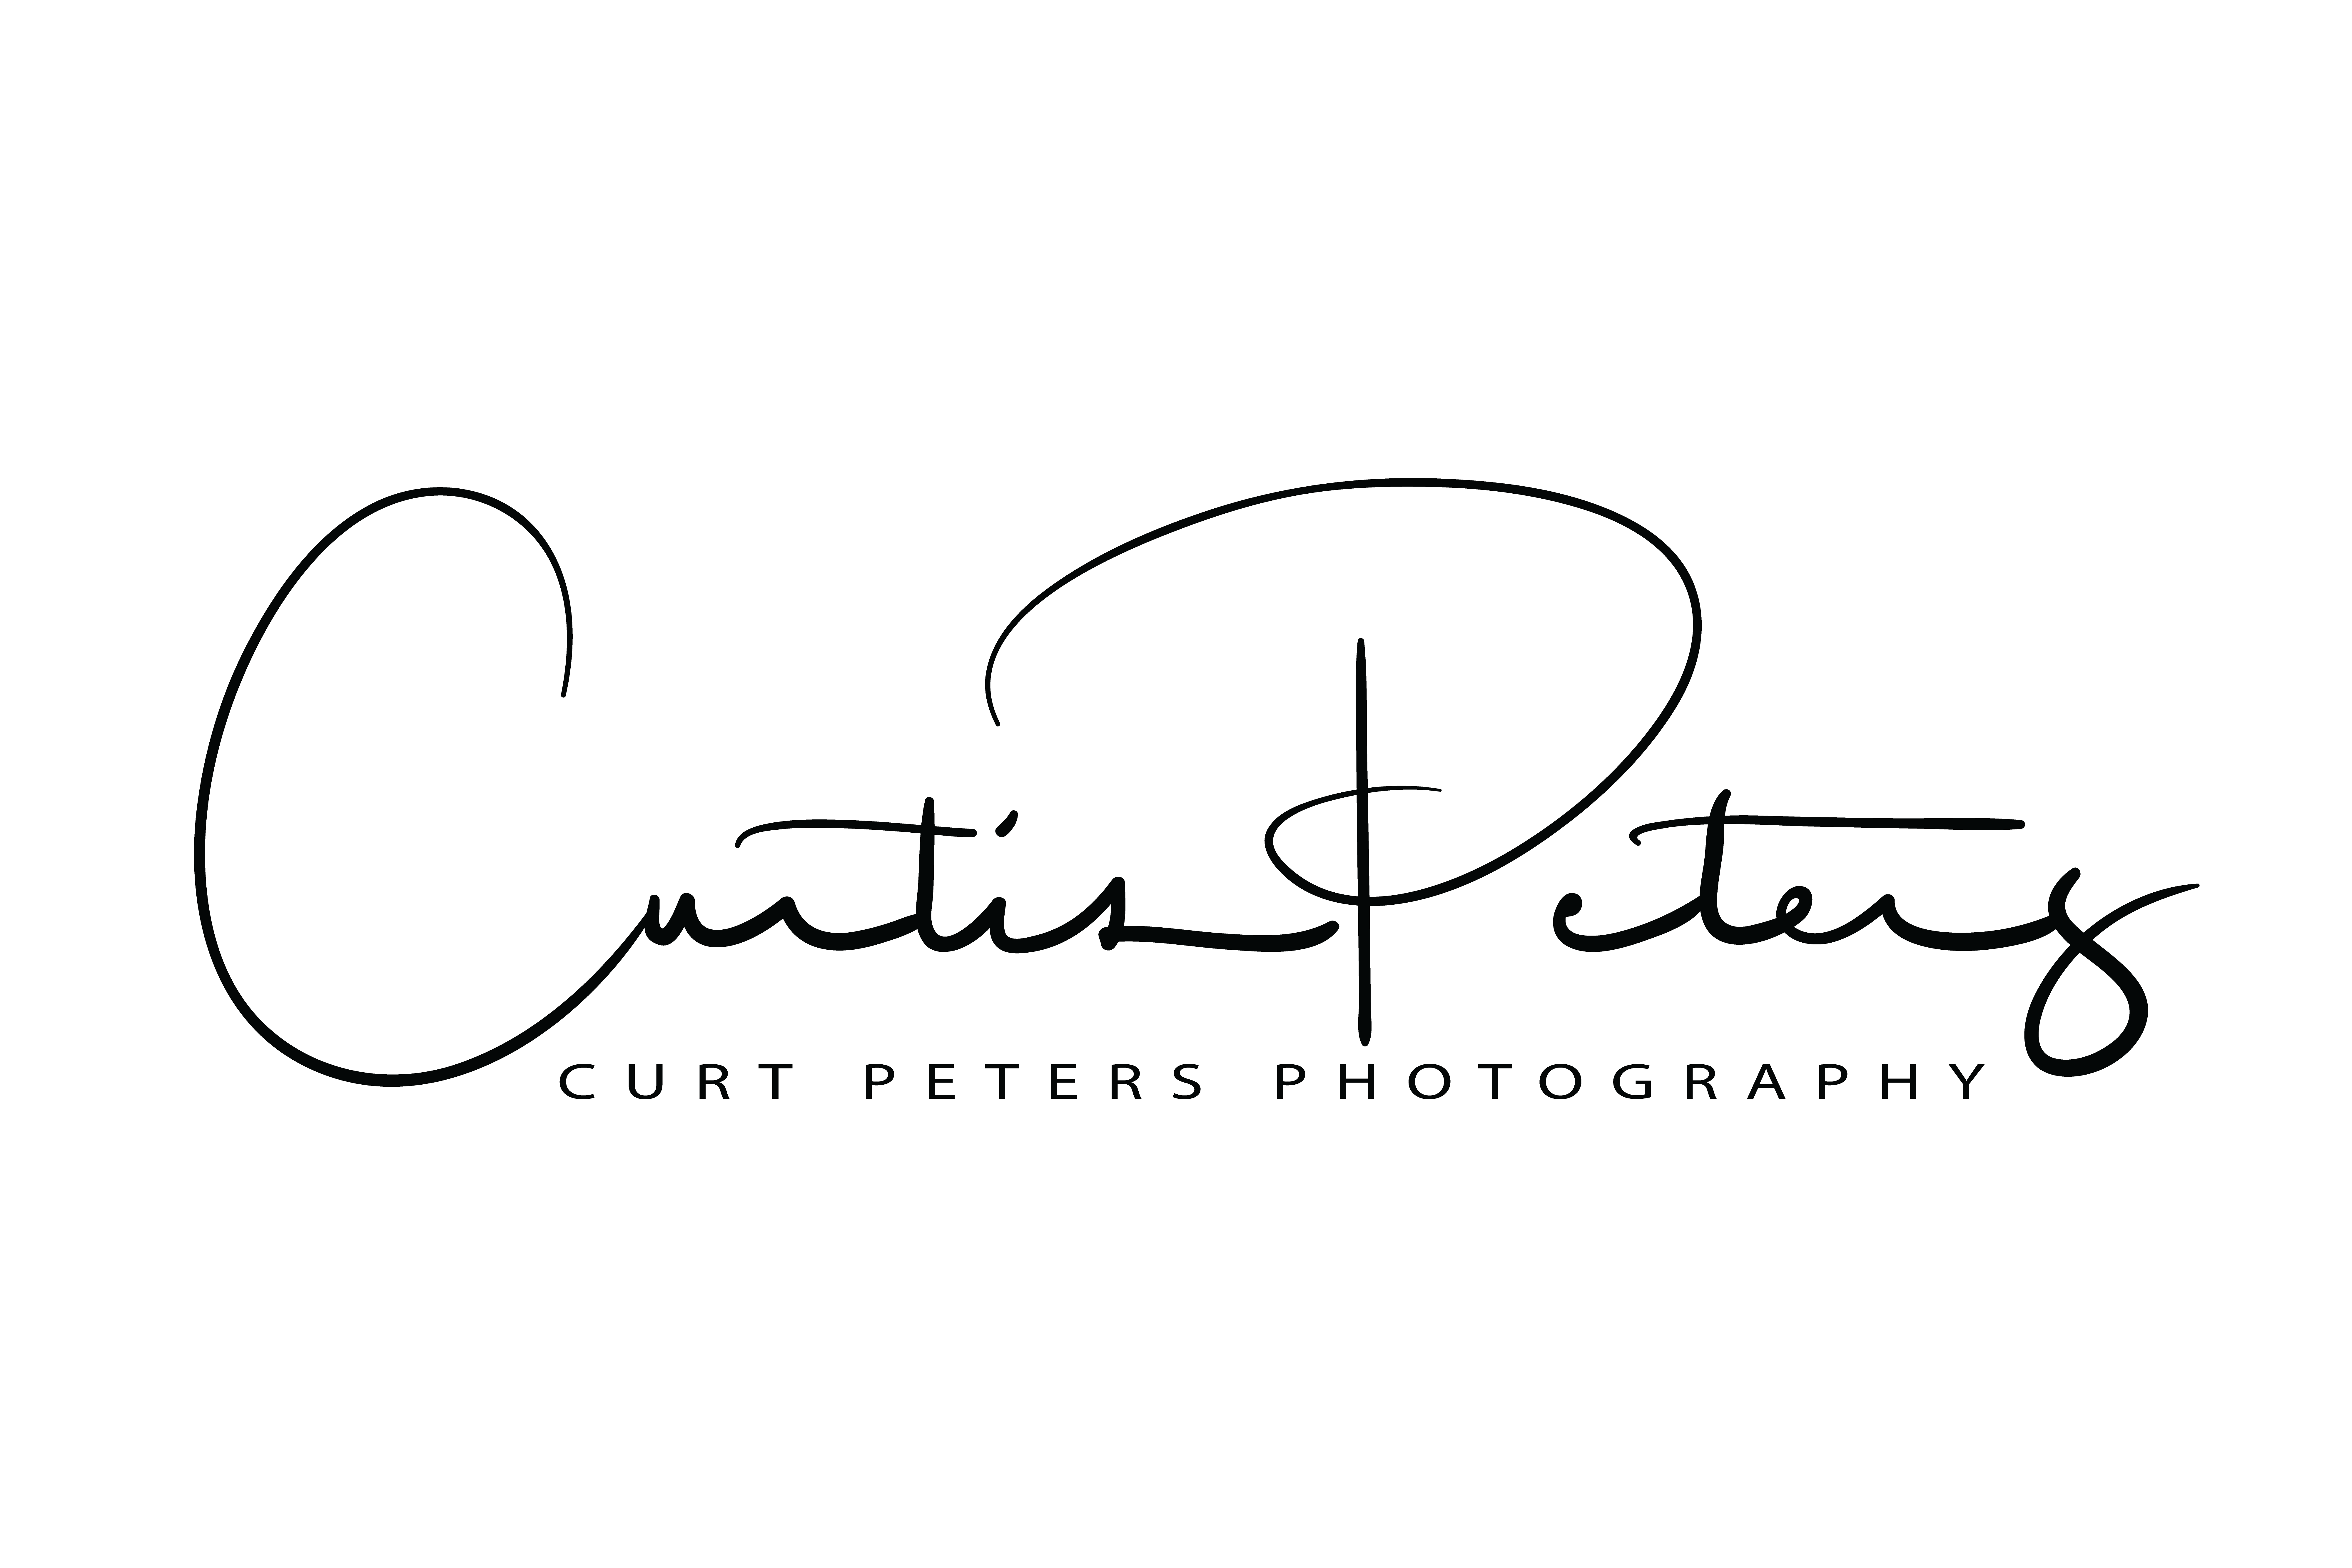 curtpeters